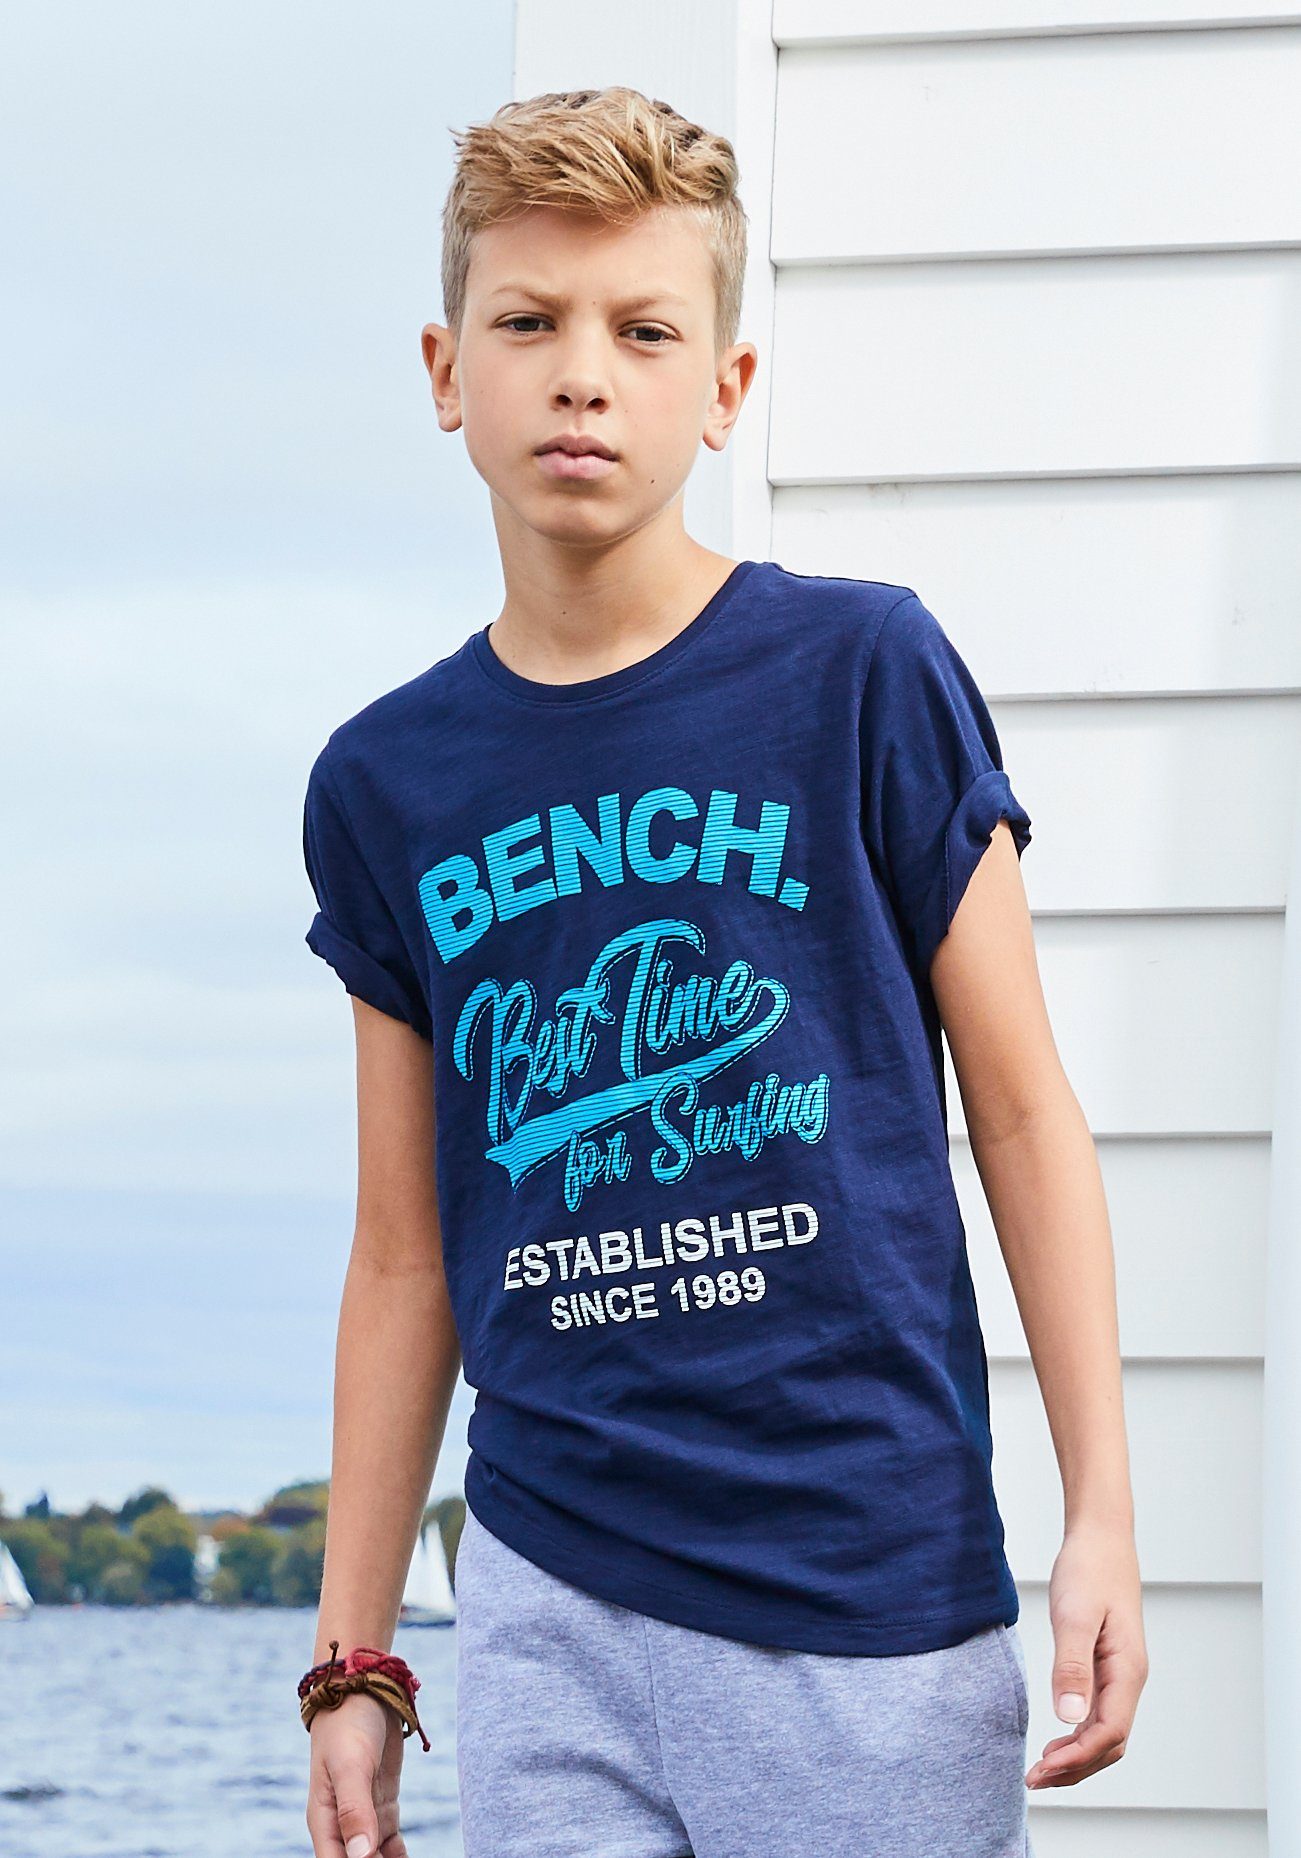 T-Shirt Best time surfing for Bench.